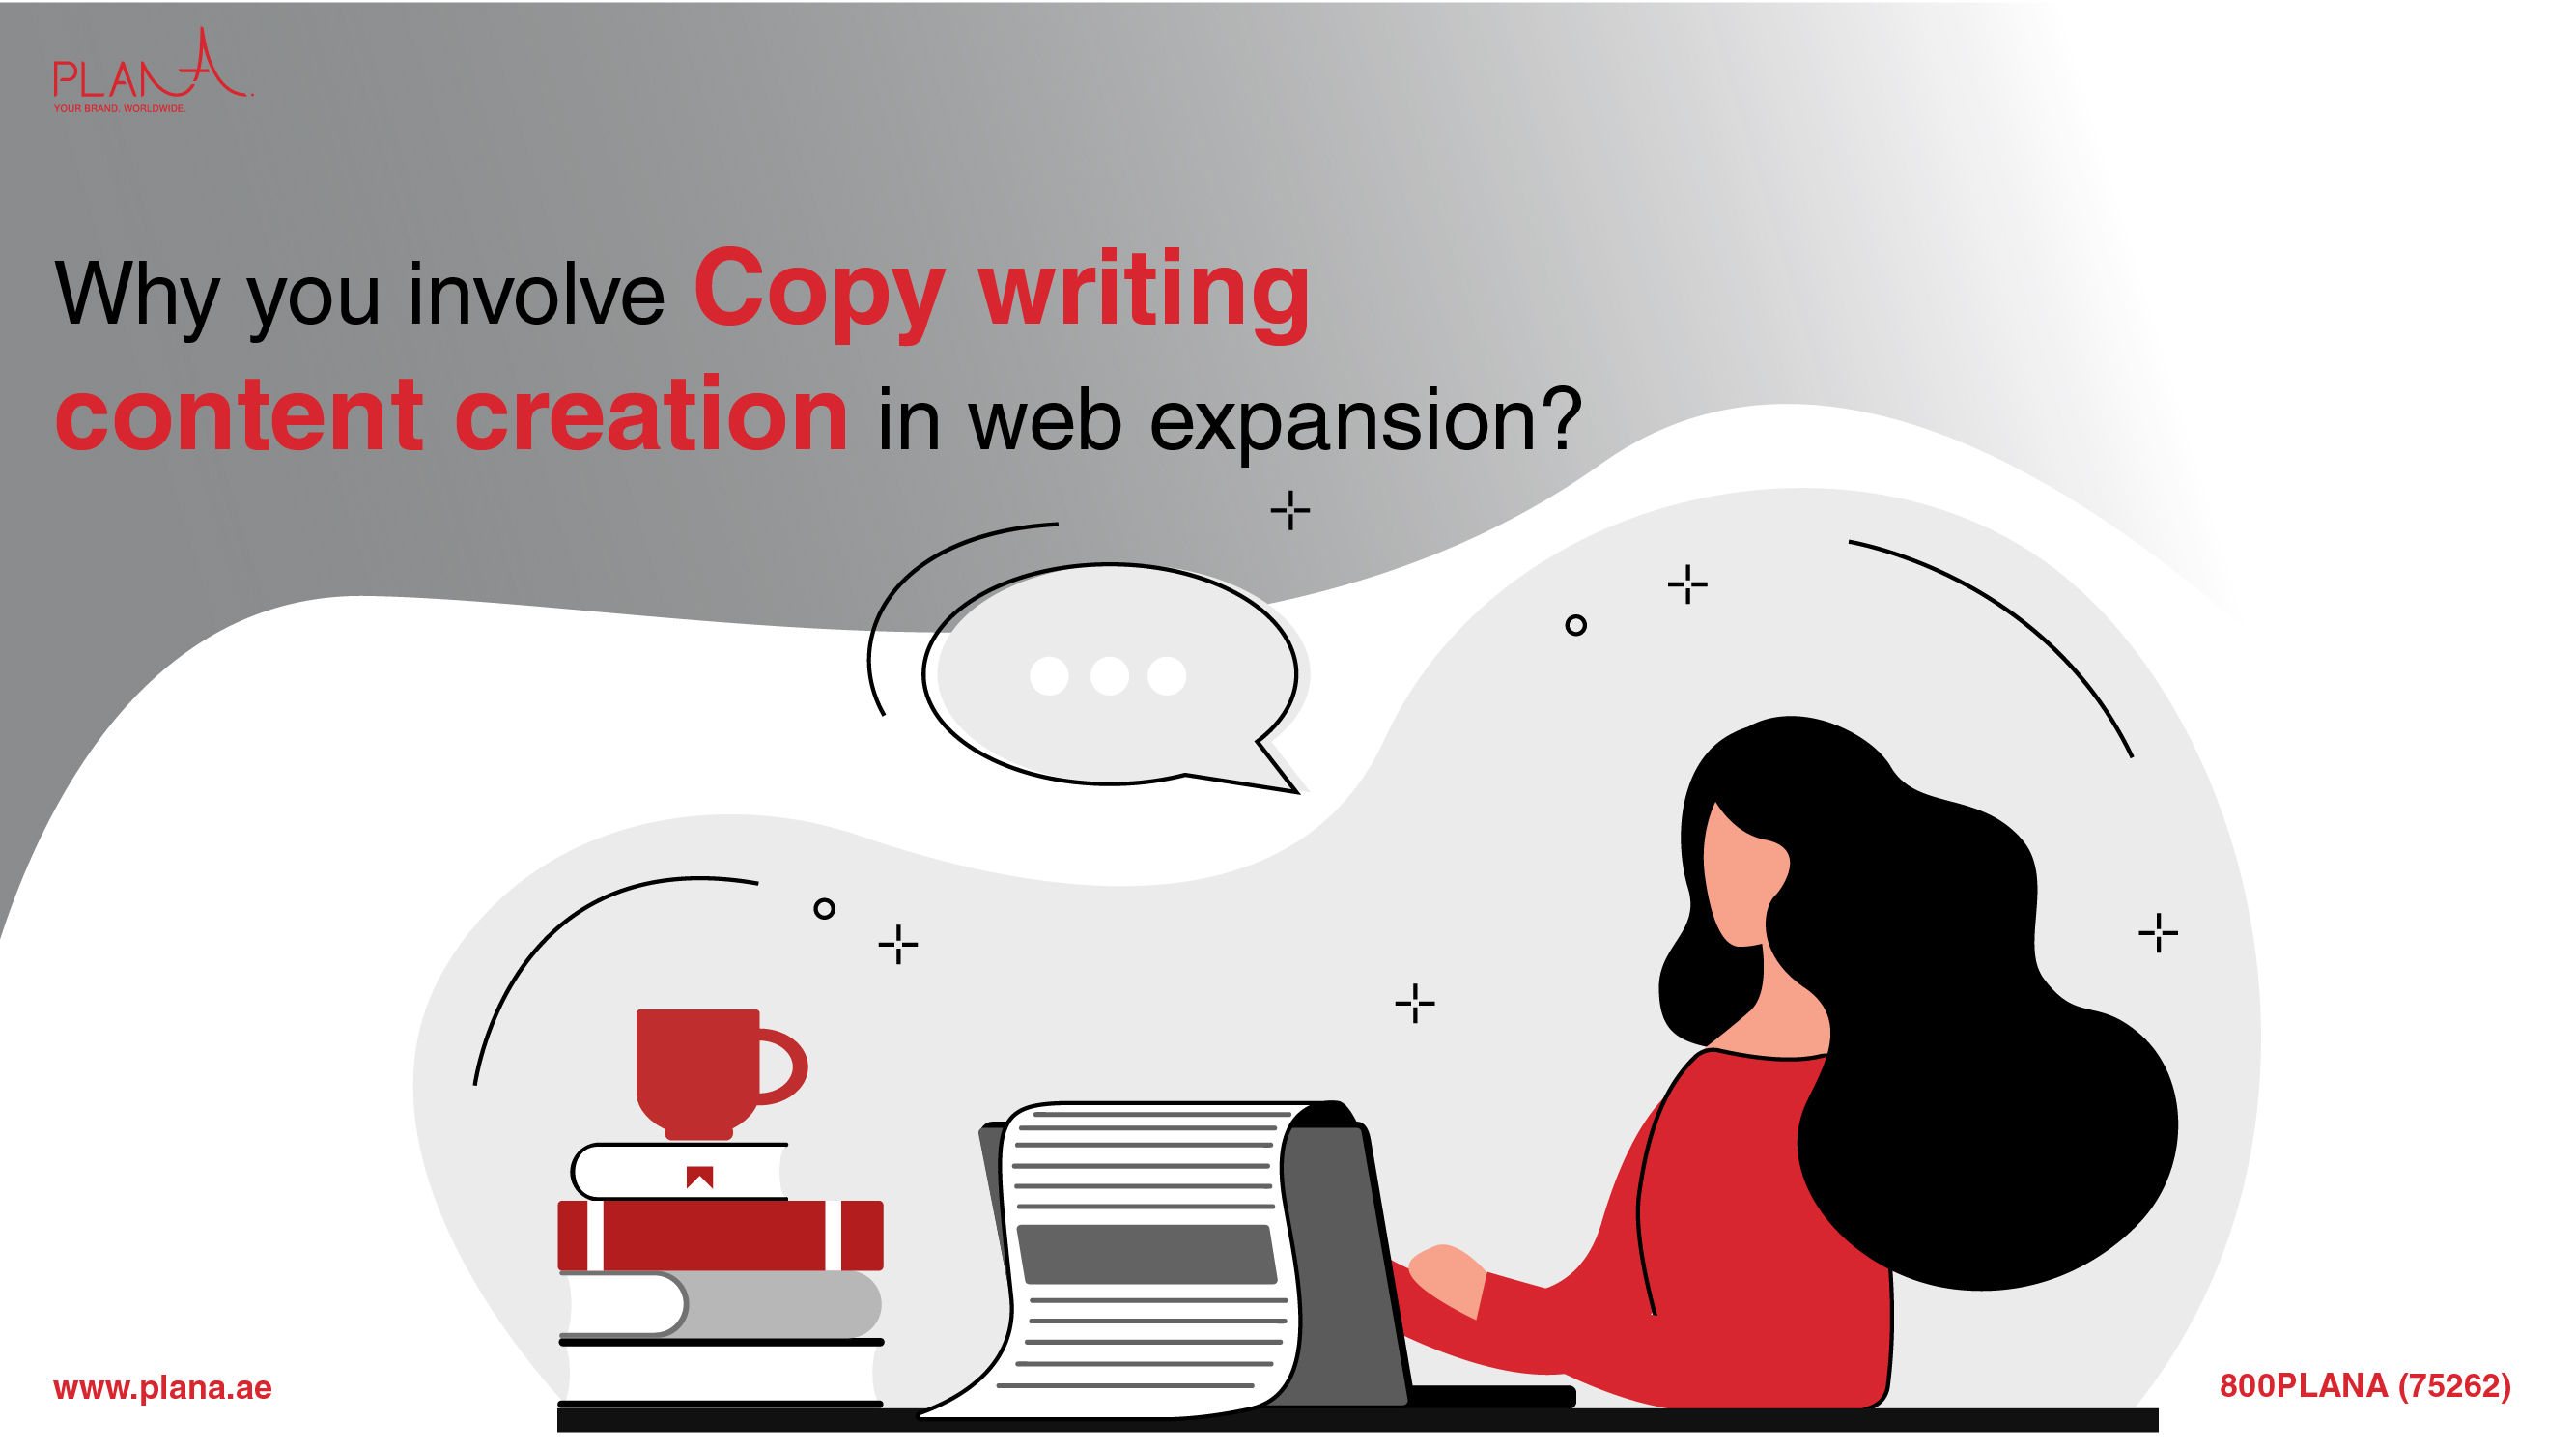 Why You Involve Copy Writing and Content Creation in Web Expansion